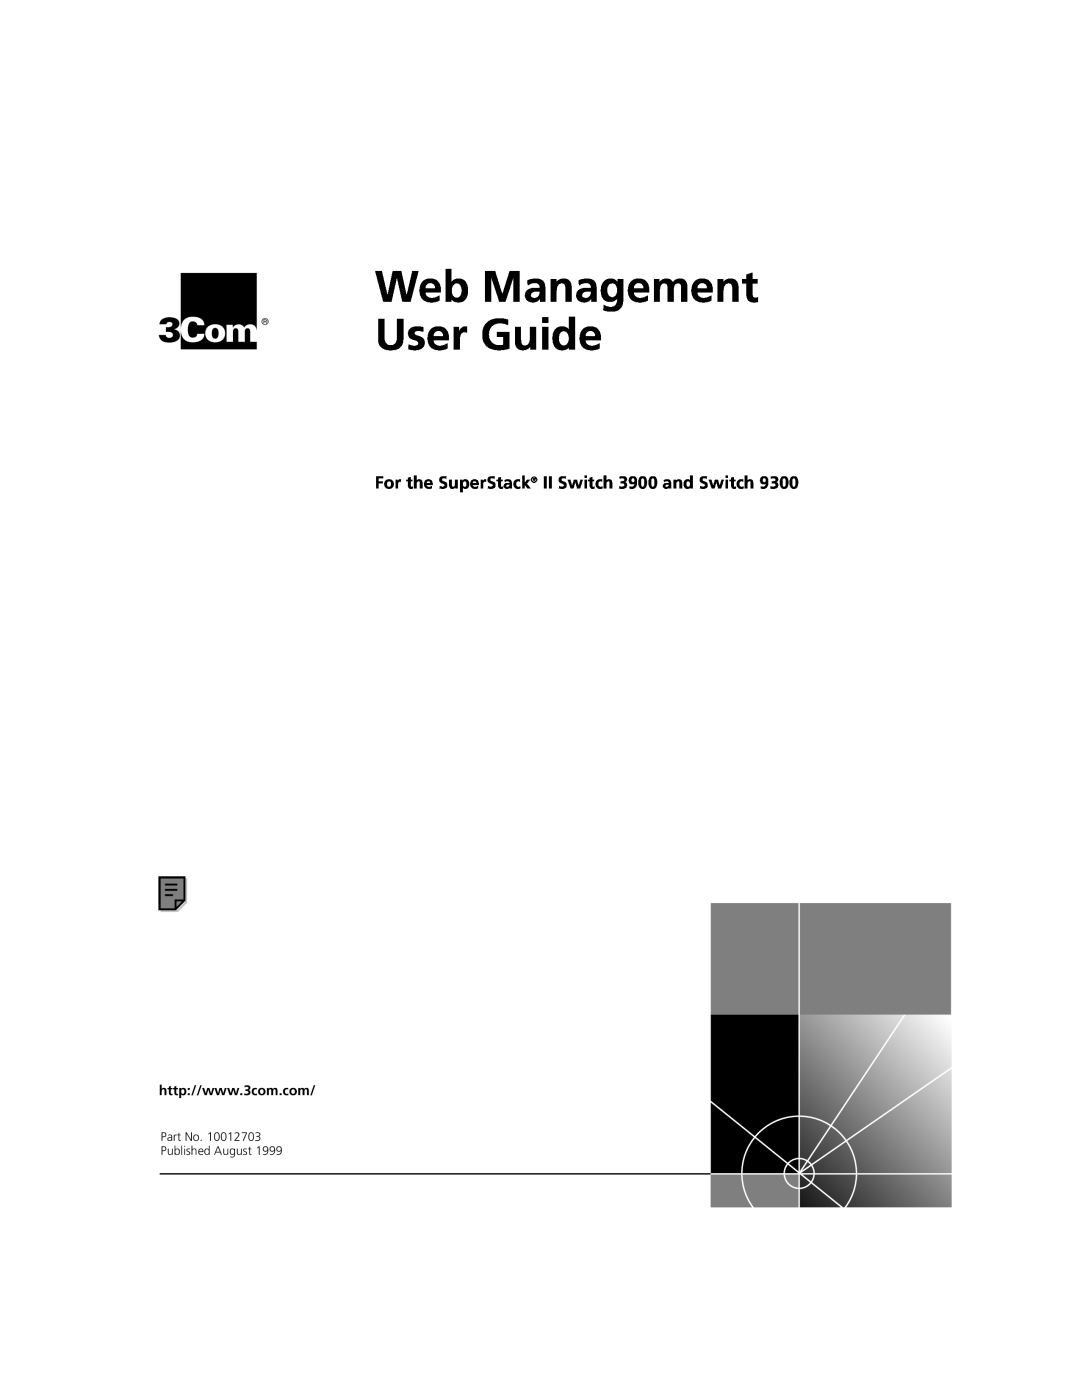 3Com manual Web Management, User Guide, For the SuperStack II Switch 3900 and Switch 